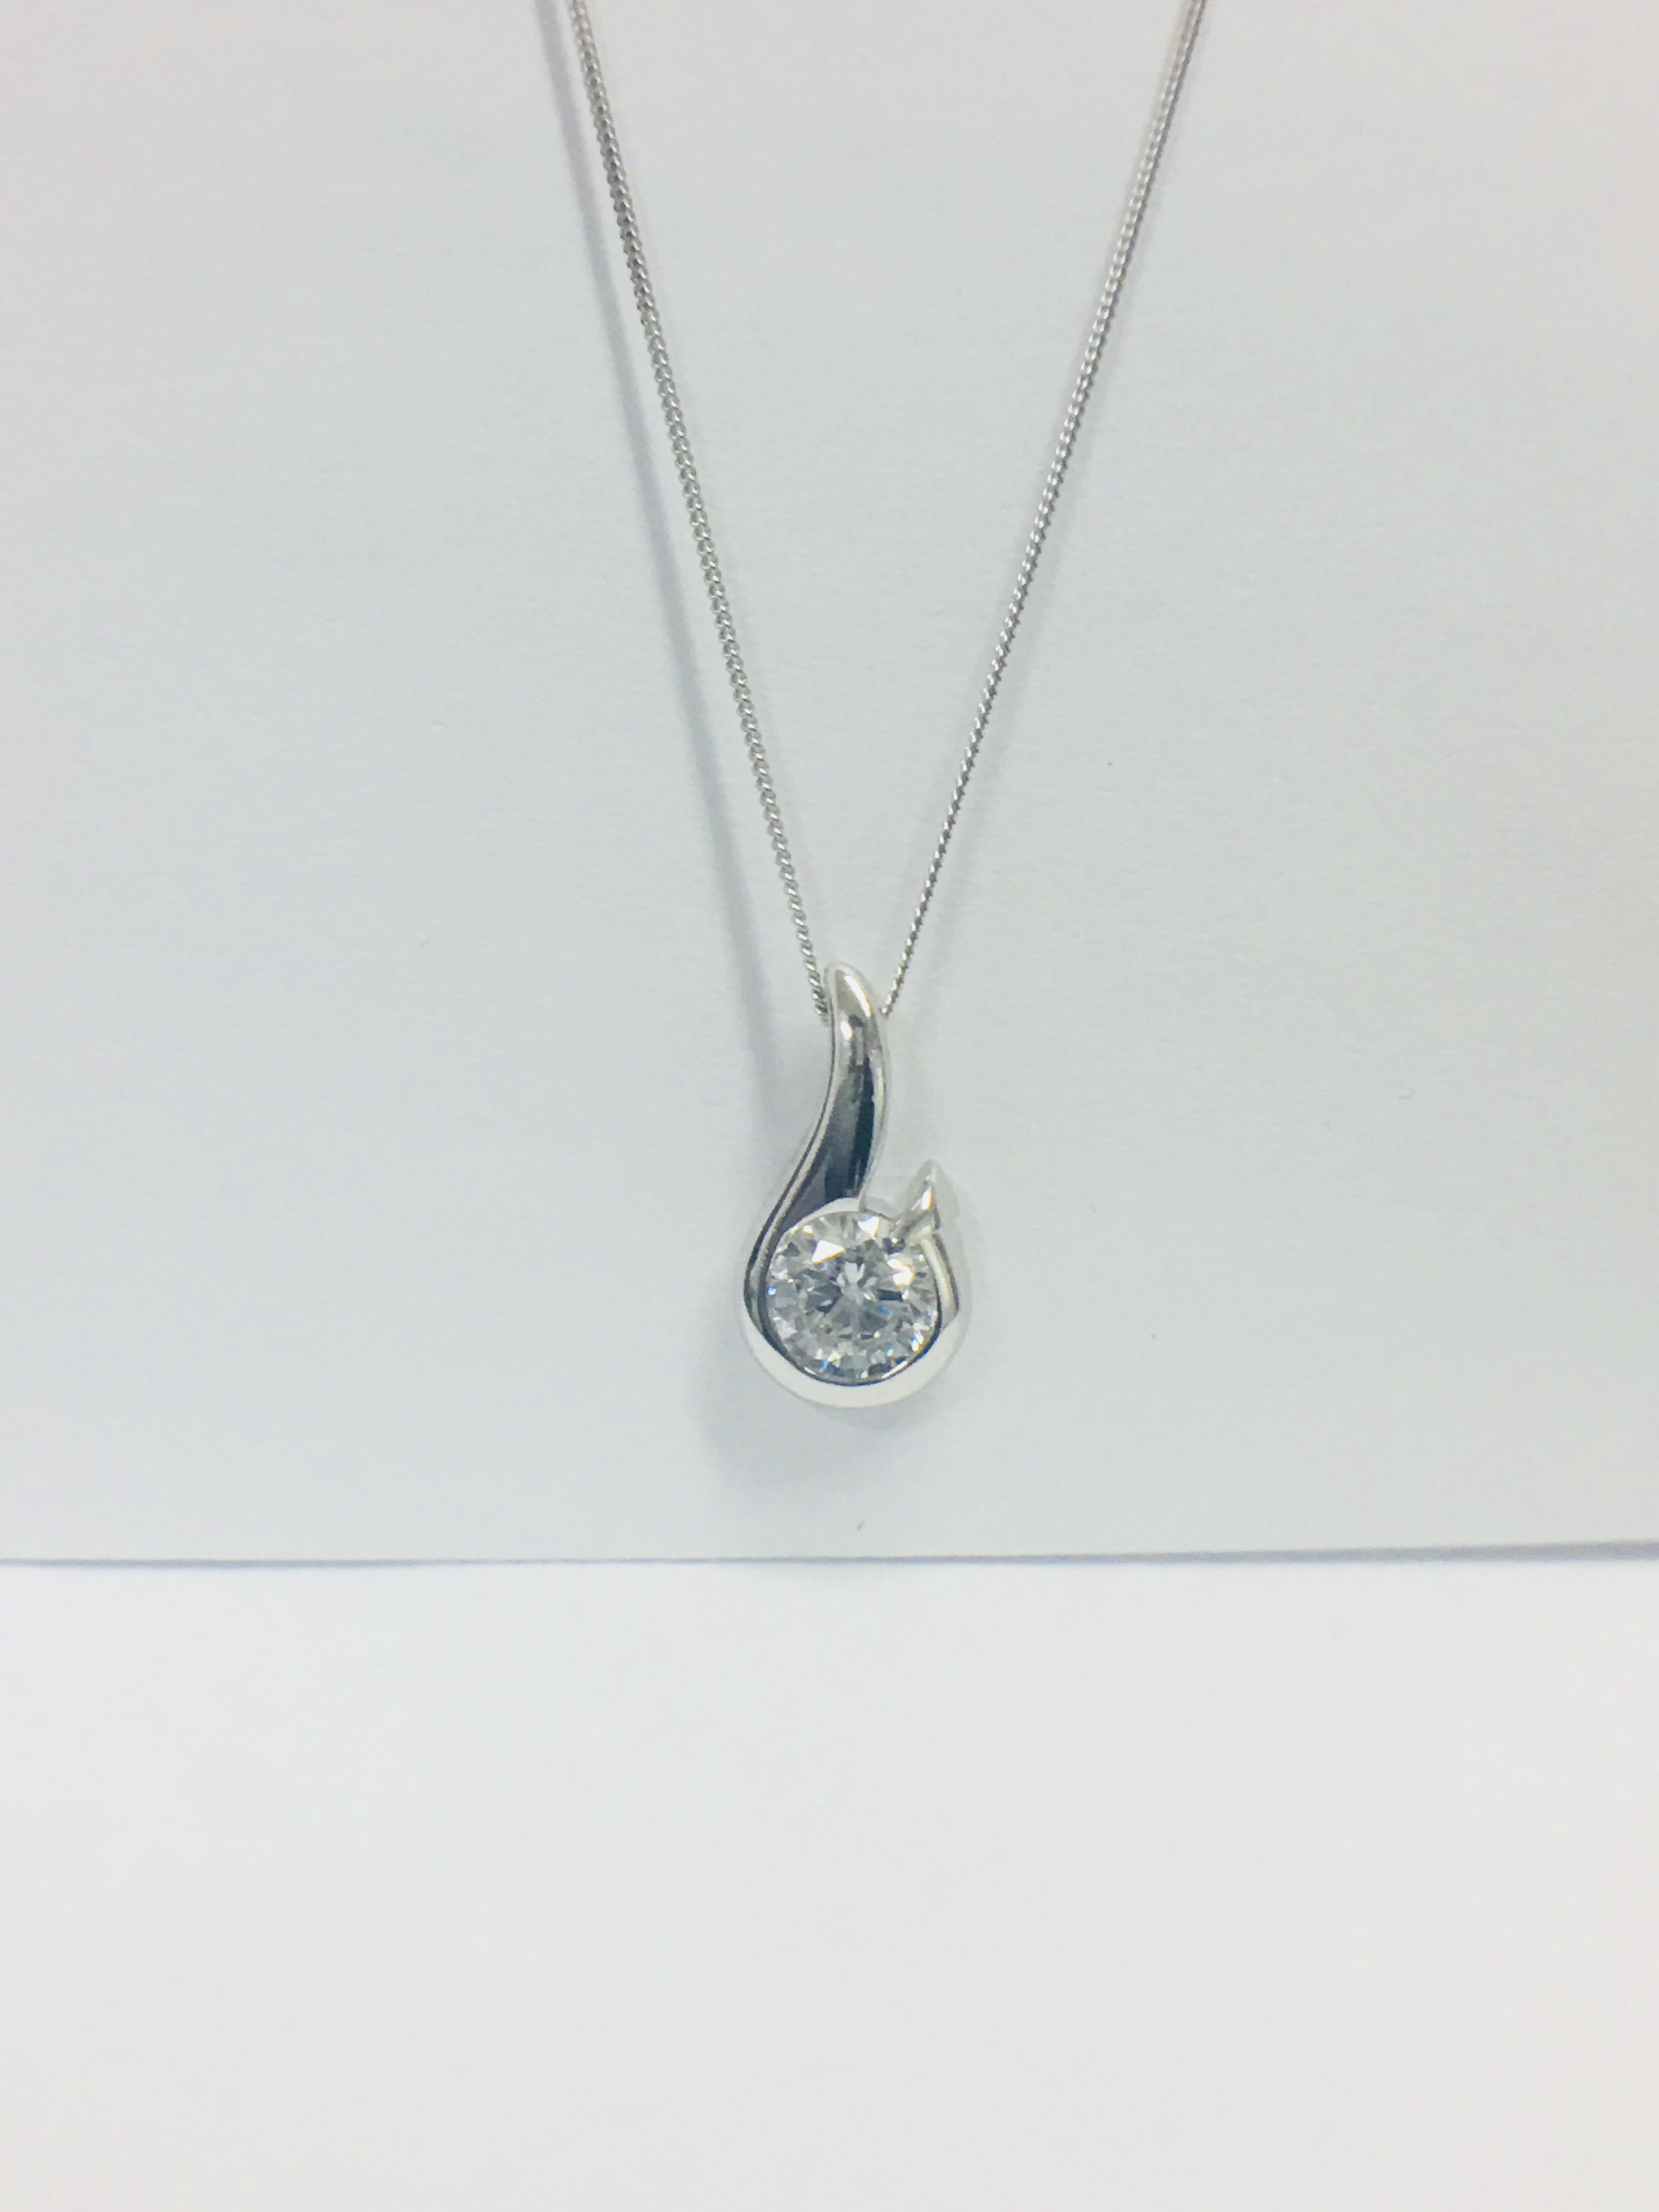 Platinum Diamond Pendant And 9Ct White Gold Necklace, - Image 4 of 5